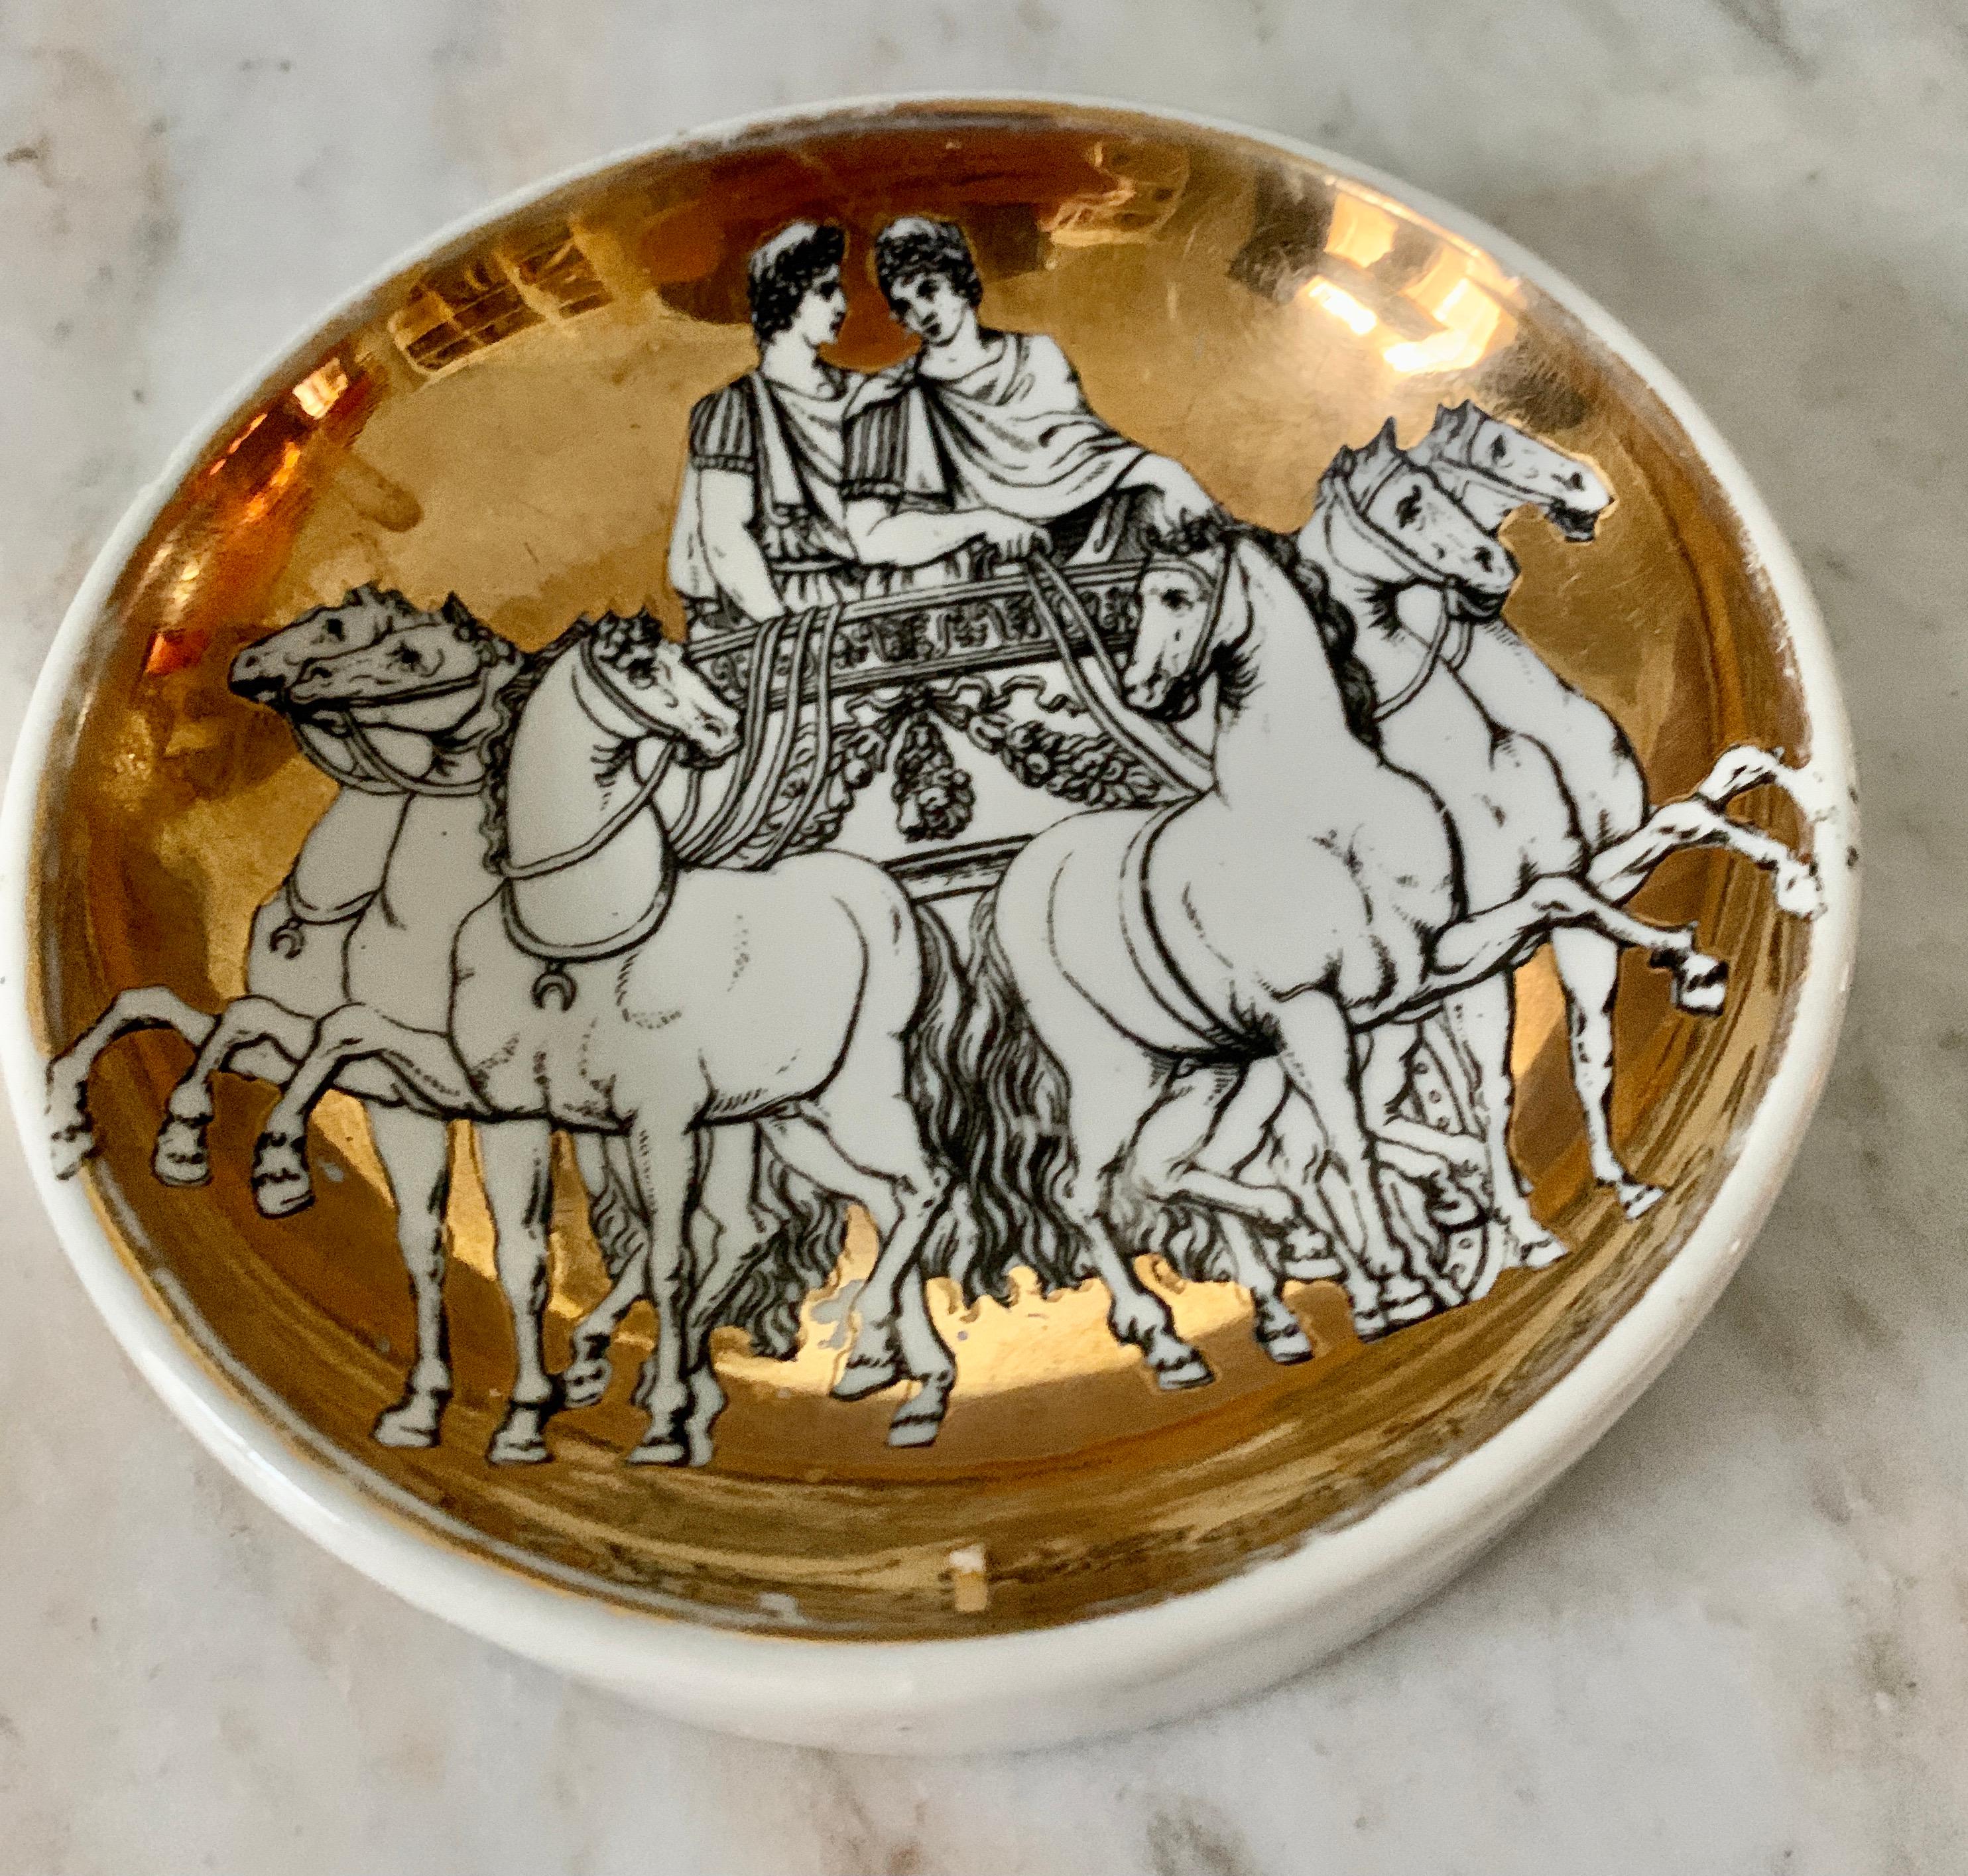 A wonderful gilt porcelain dish by Italian Designer Piero Fornasetti. The image is of two gay Roman soldiers being paraded through Rome in a Chariot Pulled by Horses. A dynamic image, and a compliment to any cocktail table as a decorative item or